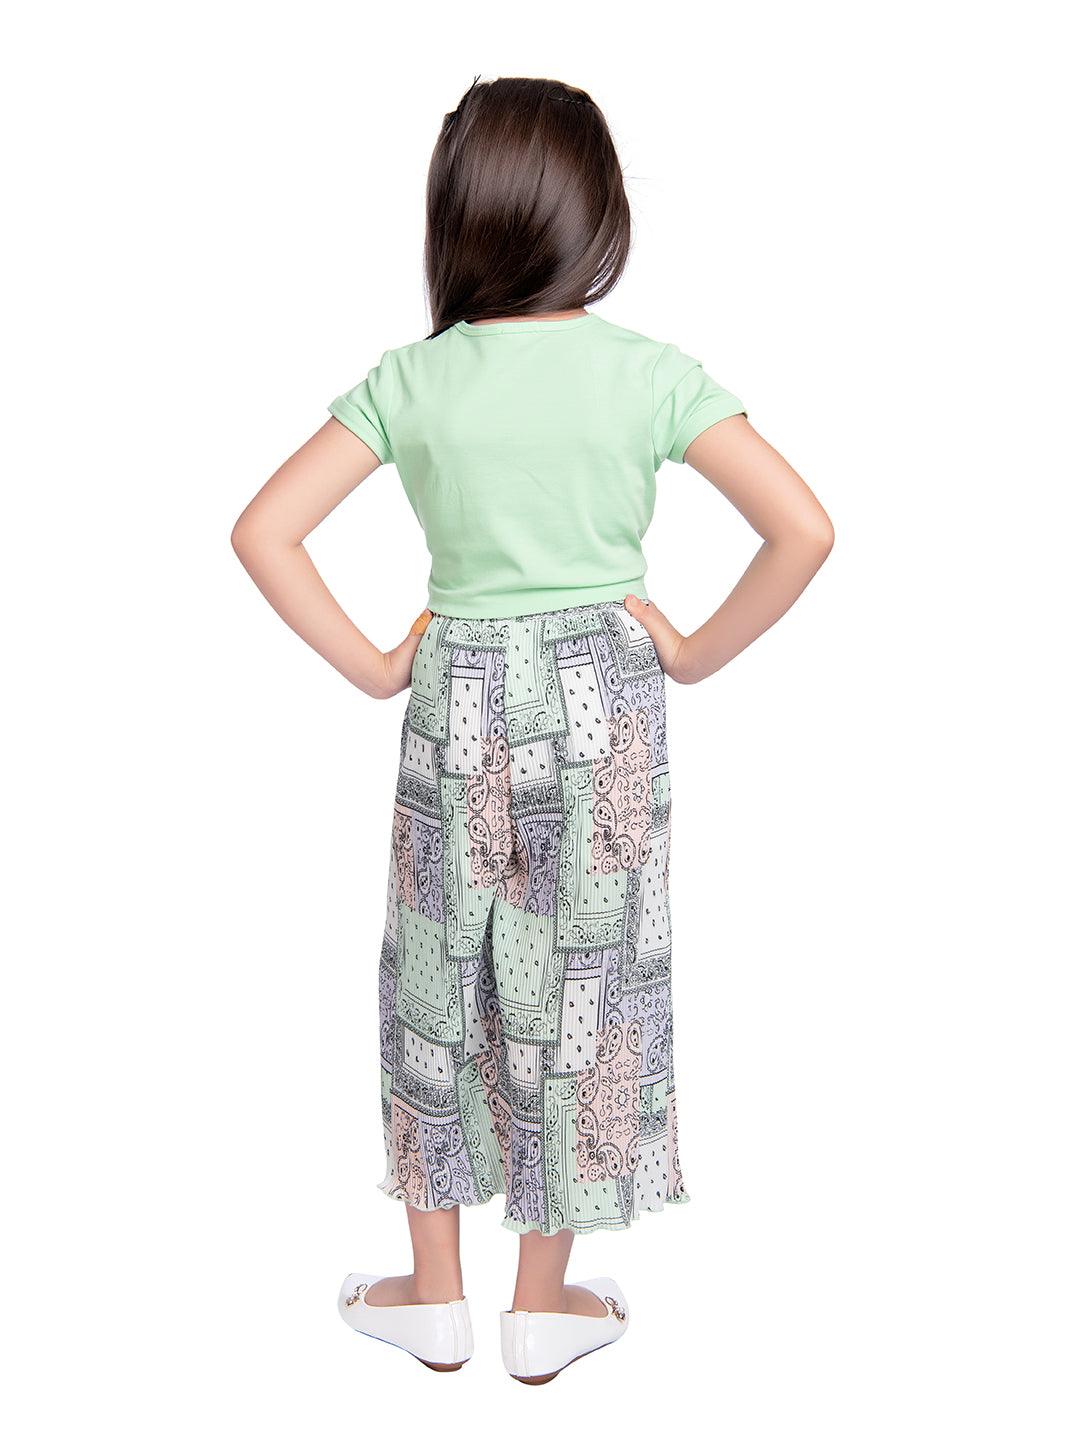 Tiny Baby Green Colored Culottes-2089 Green - TINY BABY INDIA shop.tinybaby.in